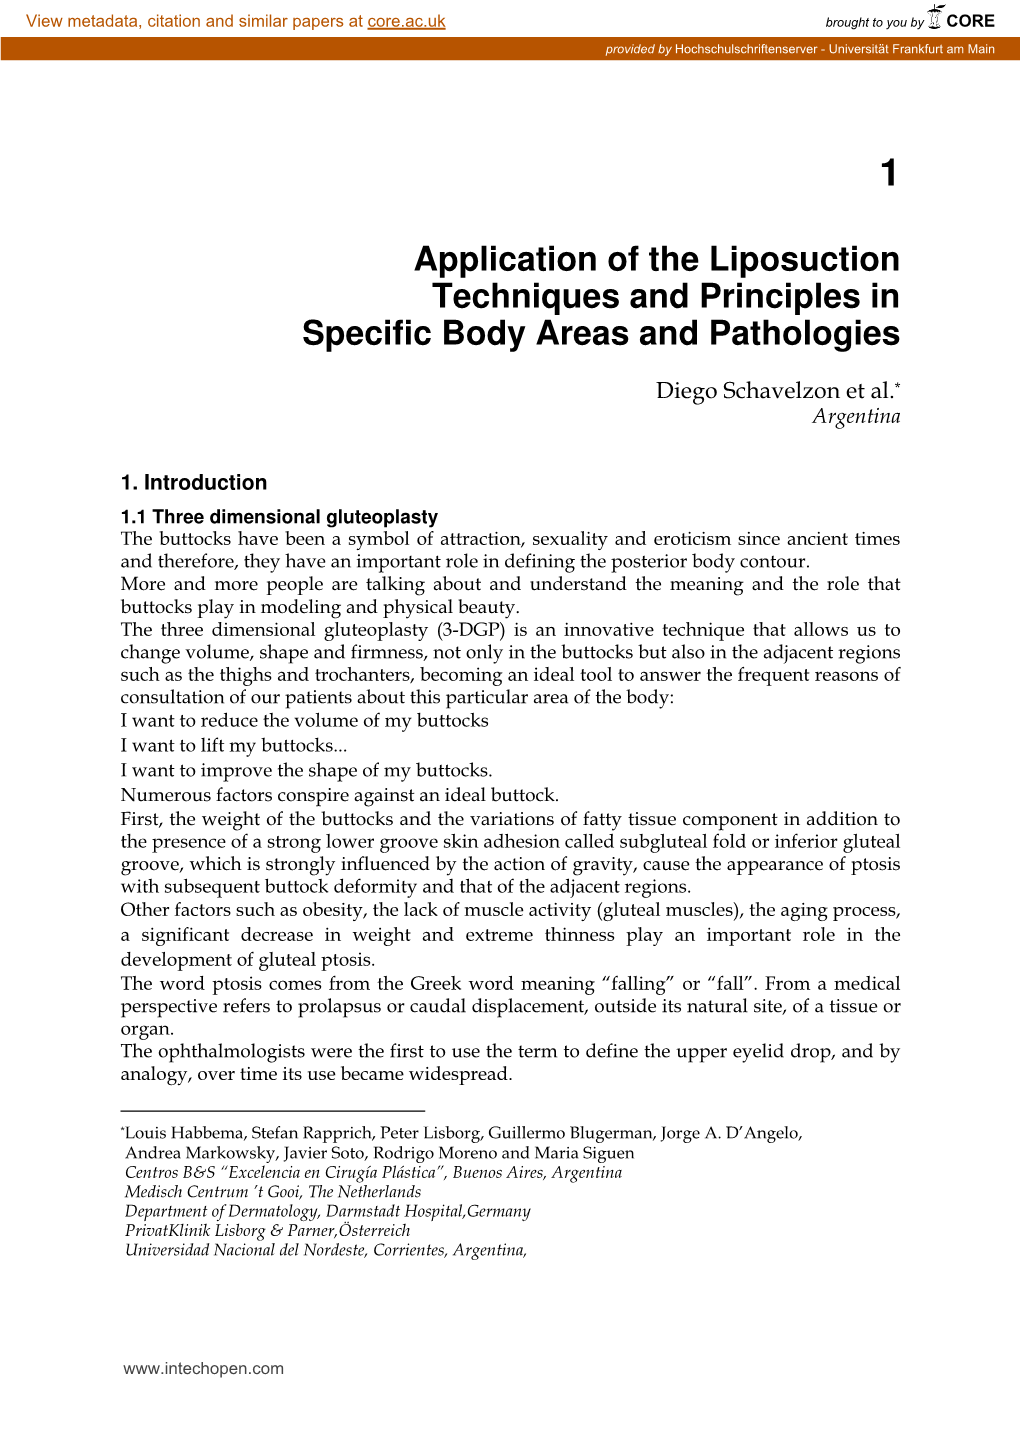 Application of the Liposuction Techniques and Principles in Specific Body Areas and Pathologies